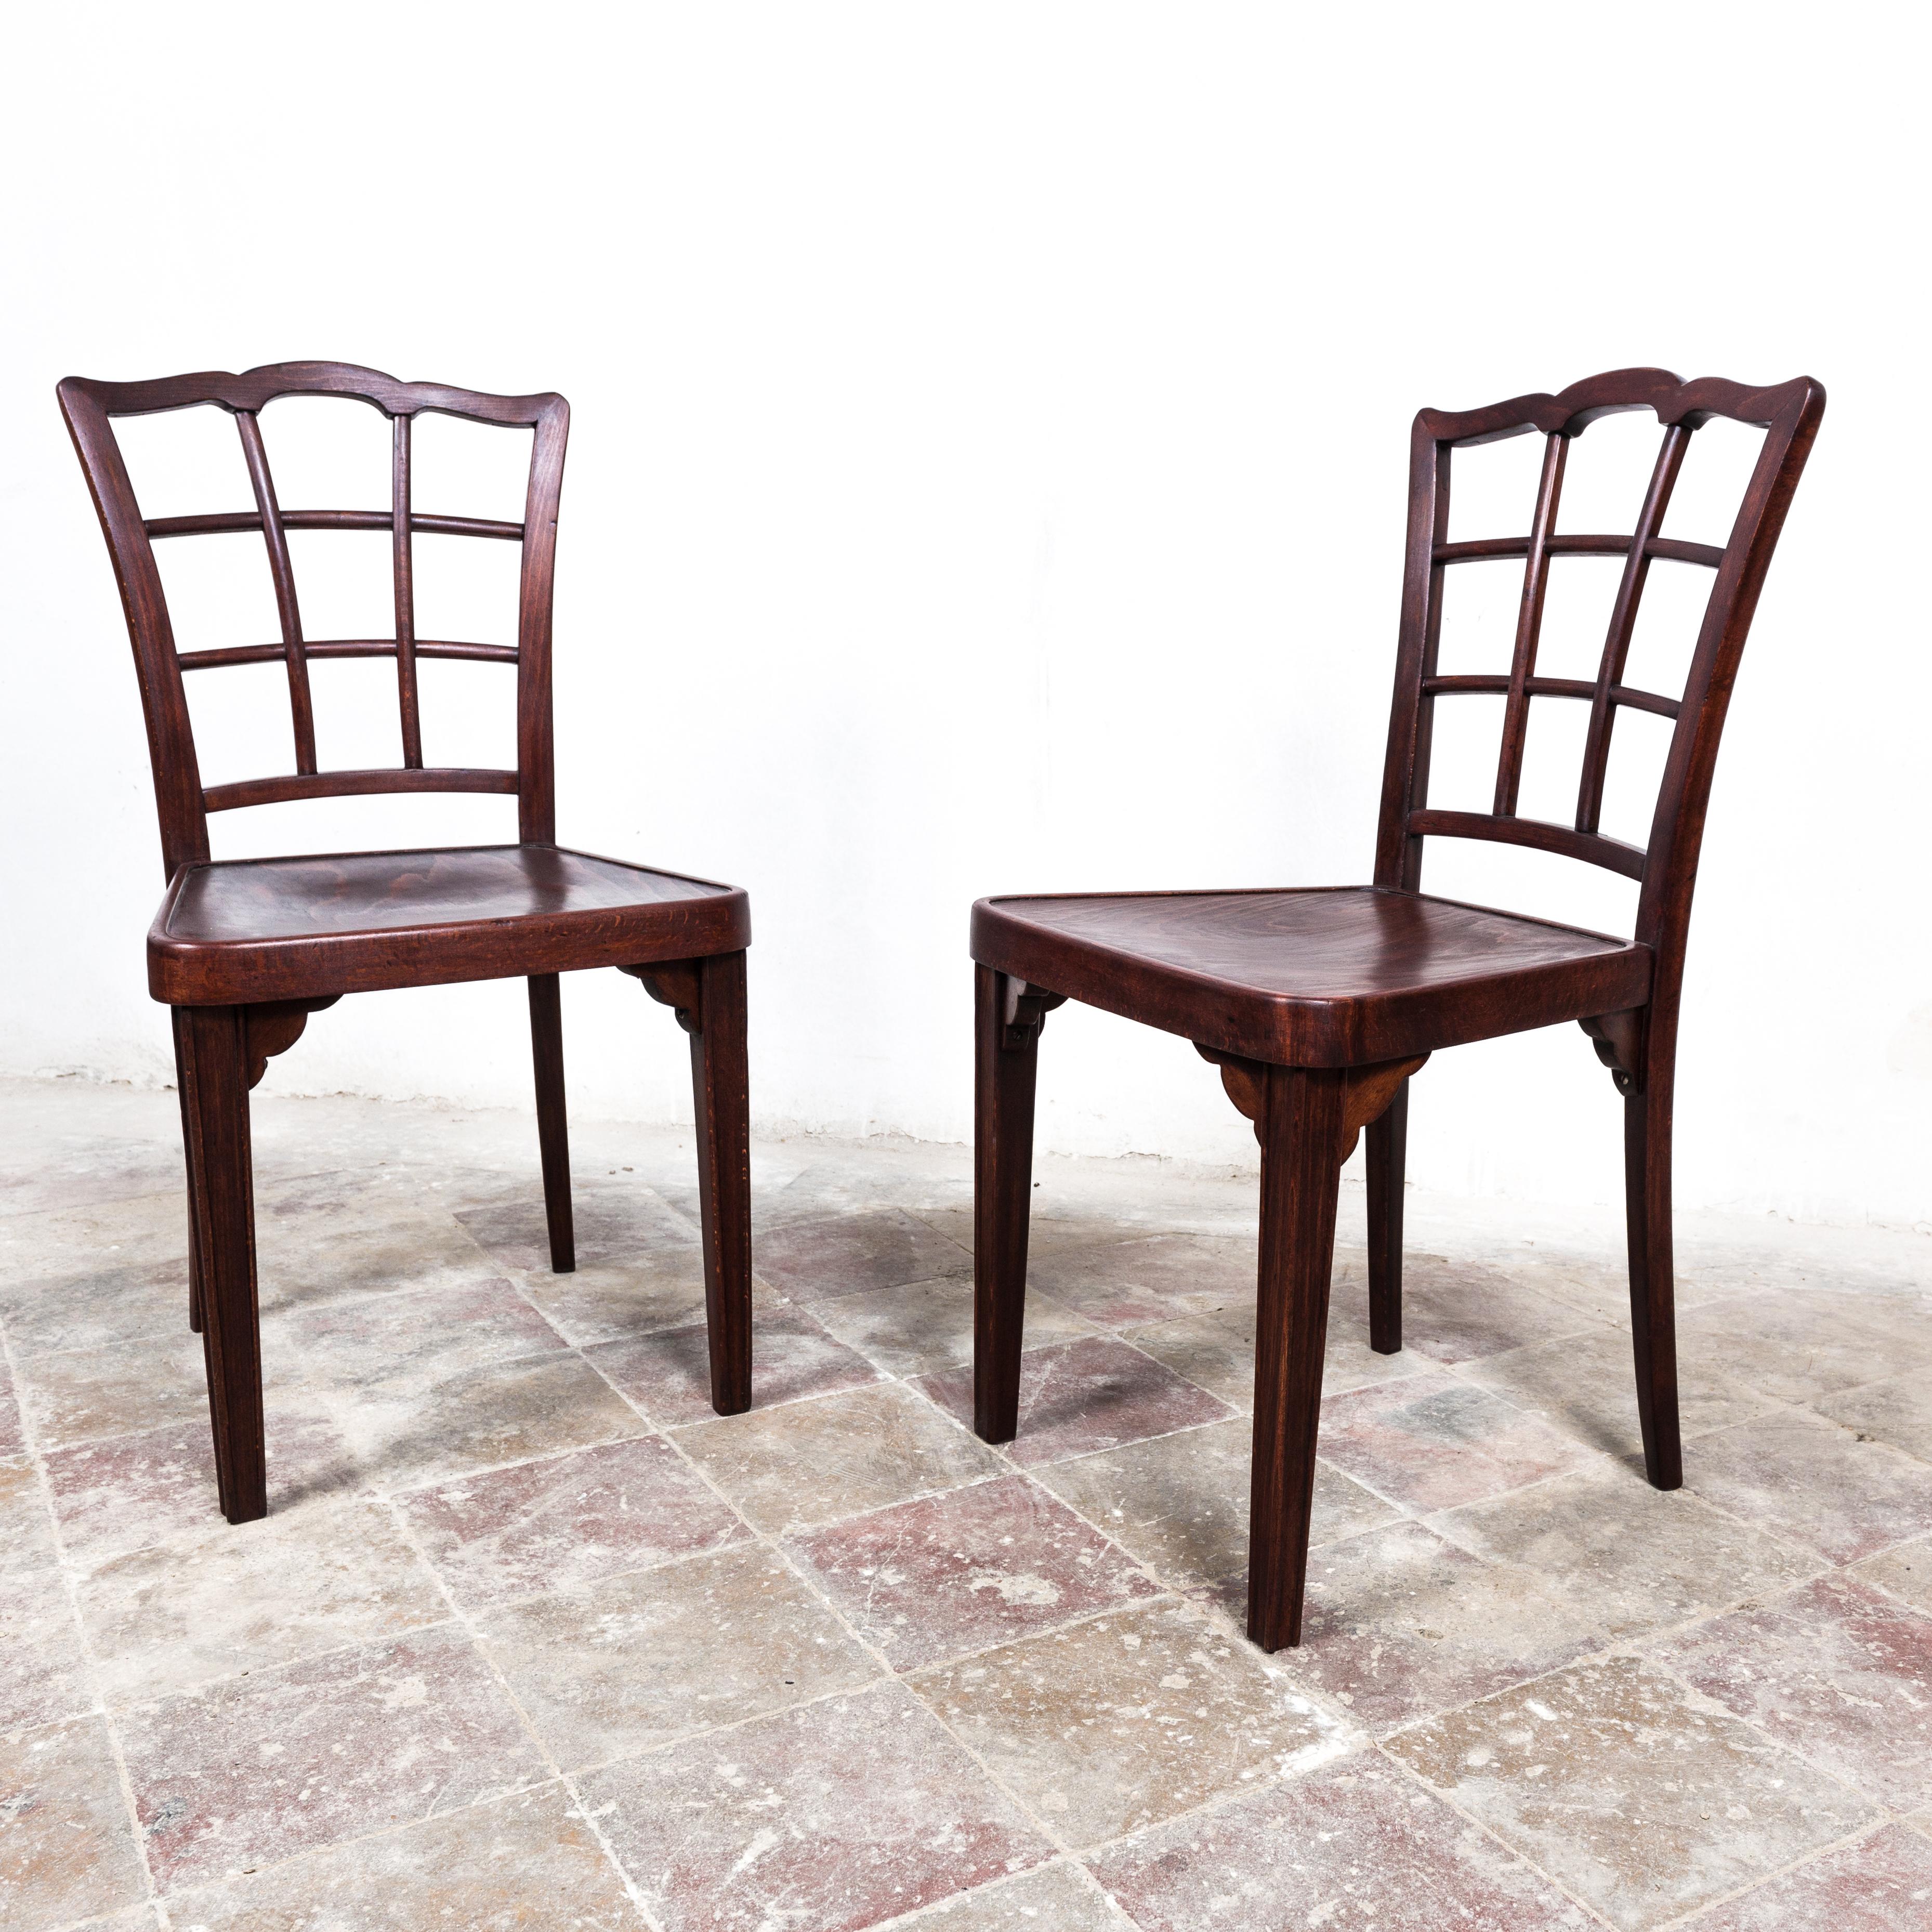 Extremely rare chairs by famous Viennese architect Otto Prutscher. Interestingly designed backrest shape, decorative wooden struts at the bottom under the seat in all corners. Chairs are expertly restored by a professional studio with long history